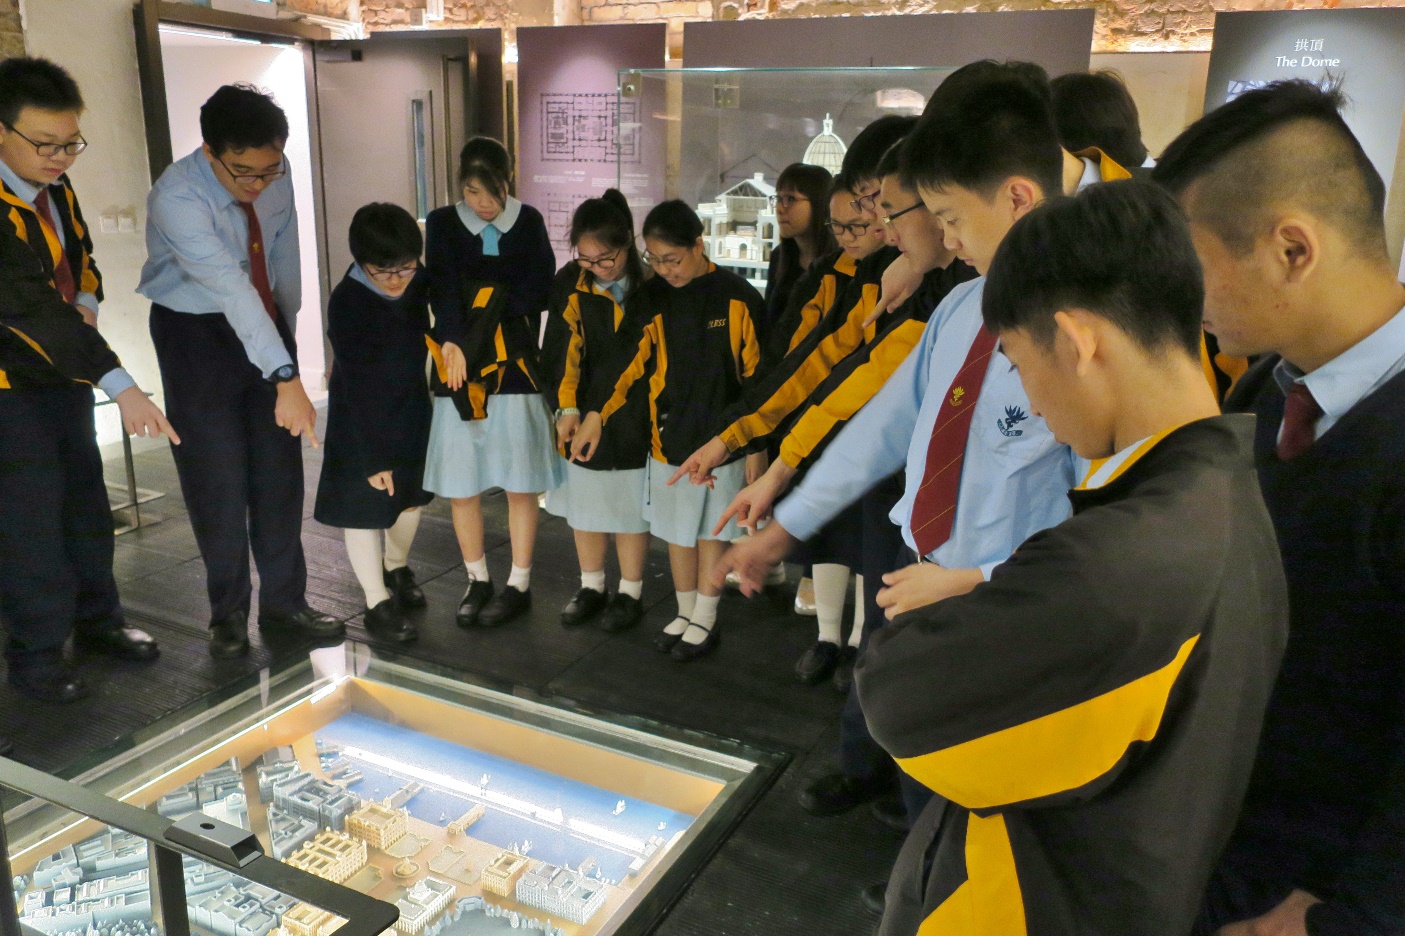 Students joining the school guided visit to the Court of Final Appeal tour around the Architectural Heritage Gallery